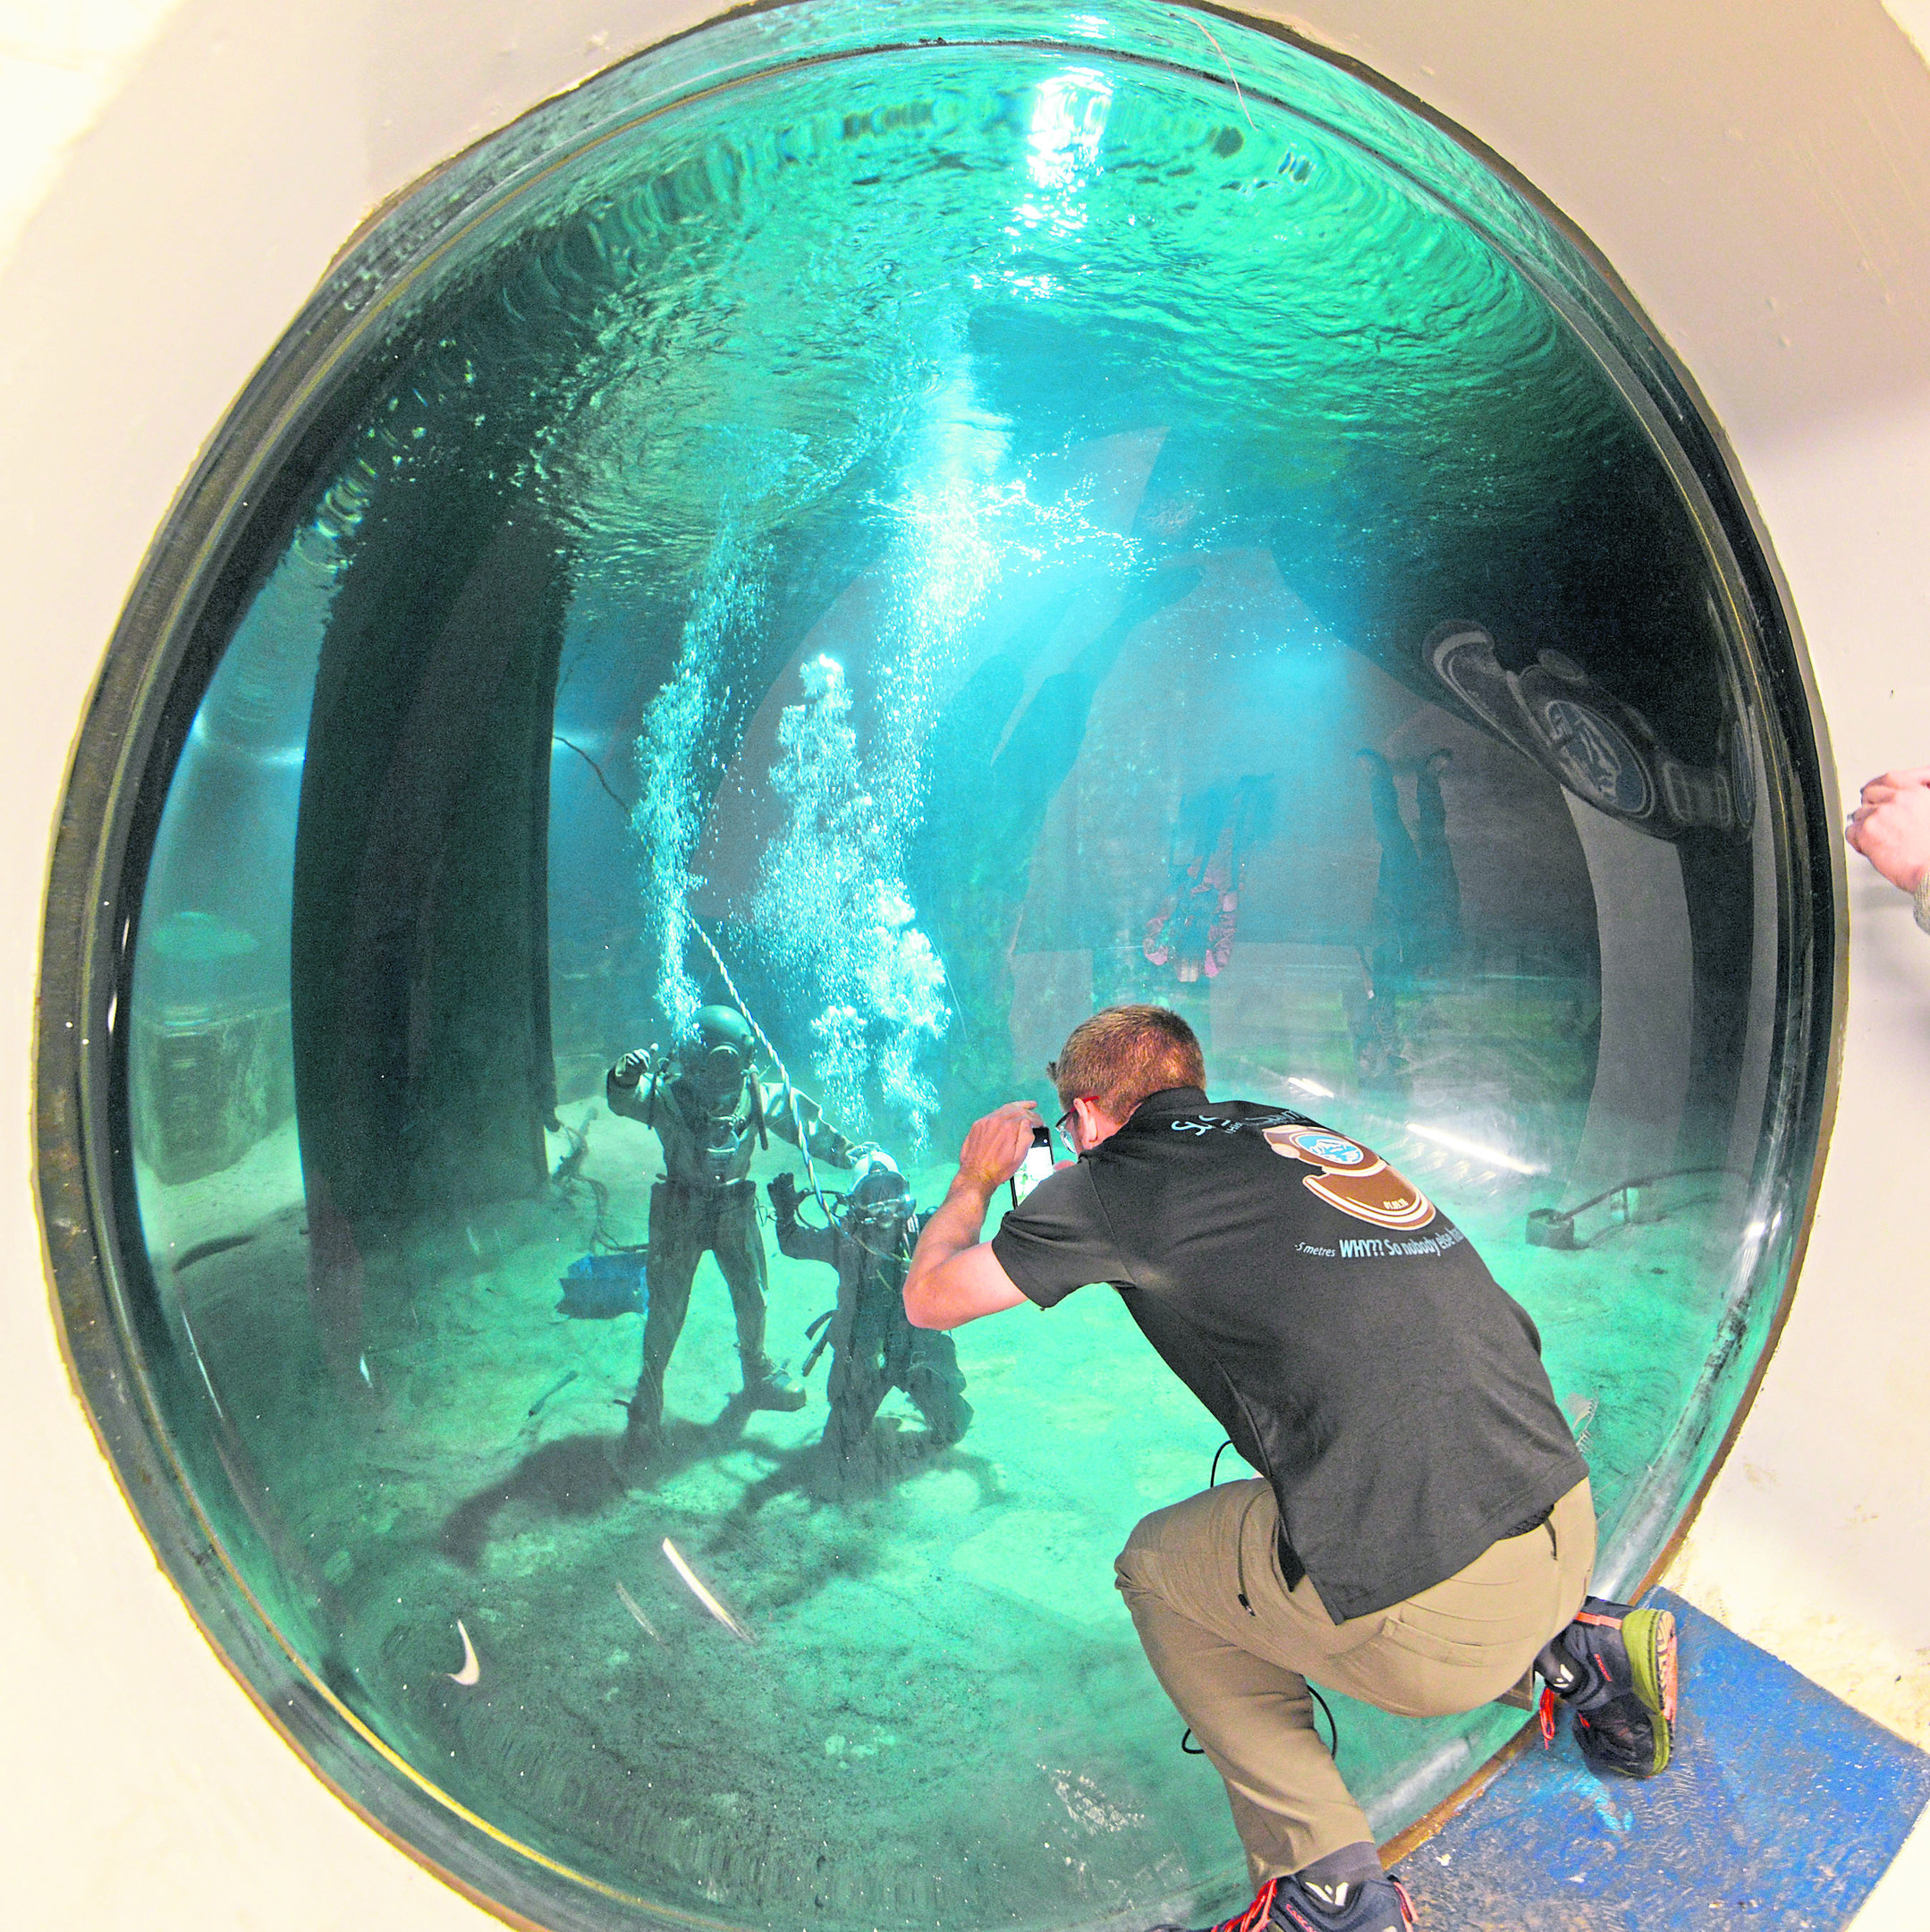 The view through the hemispherical window Paul (Ginge) Guiver tries out his vintage suit in the tank at Fort Williams Underwater Centre. Picture Iain Ferguson.